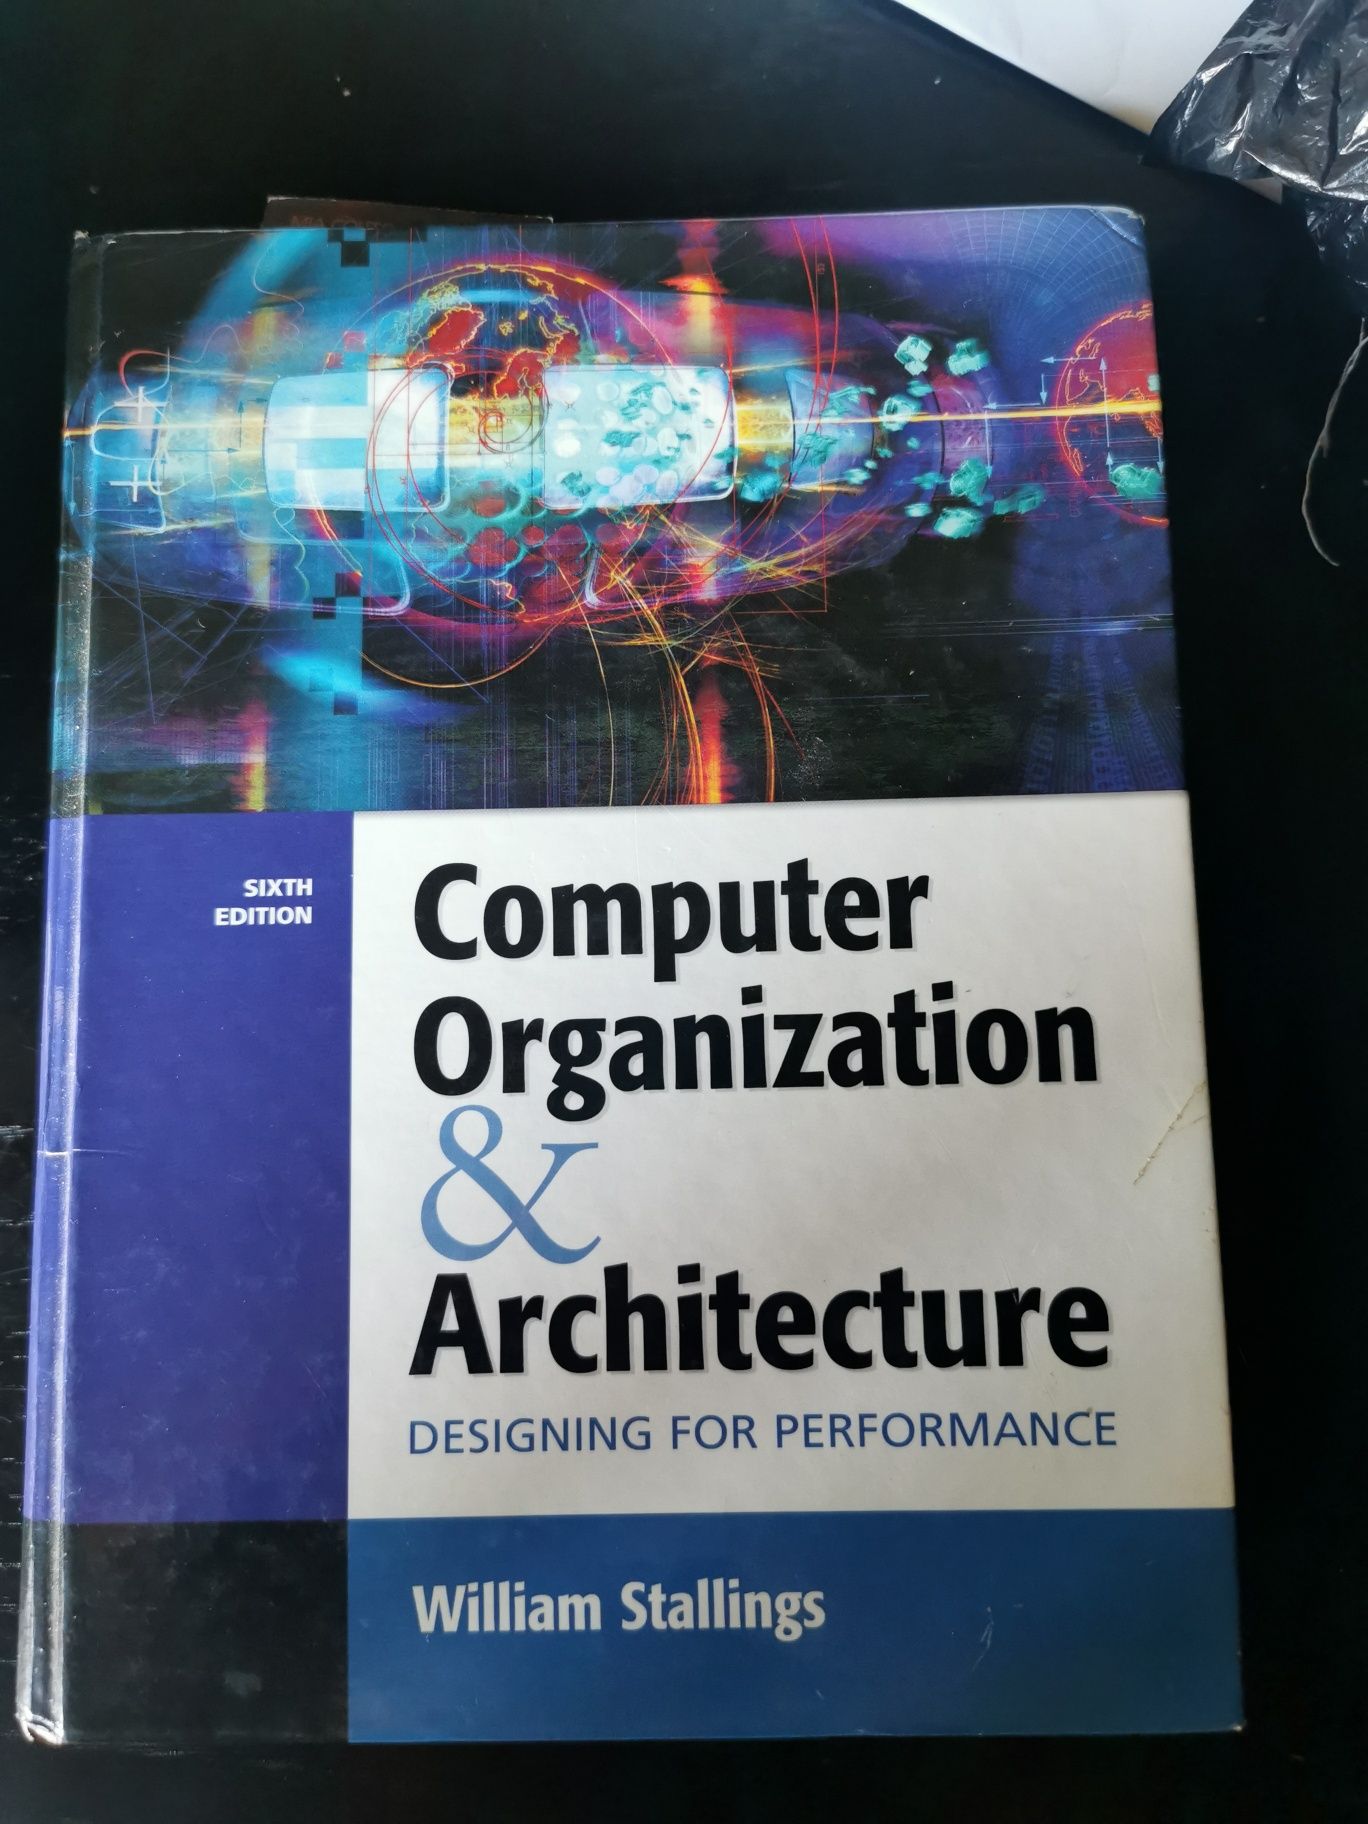 computer organization & architecture Designing for performance